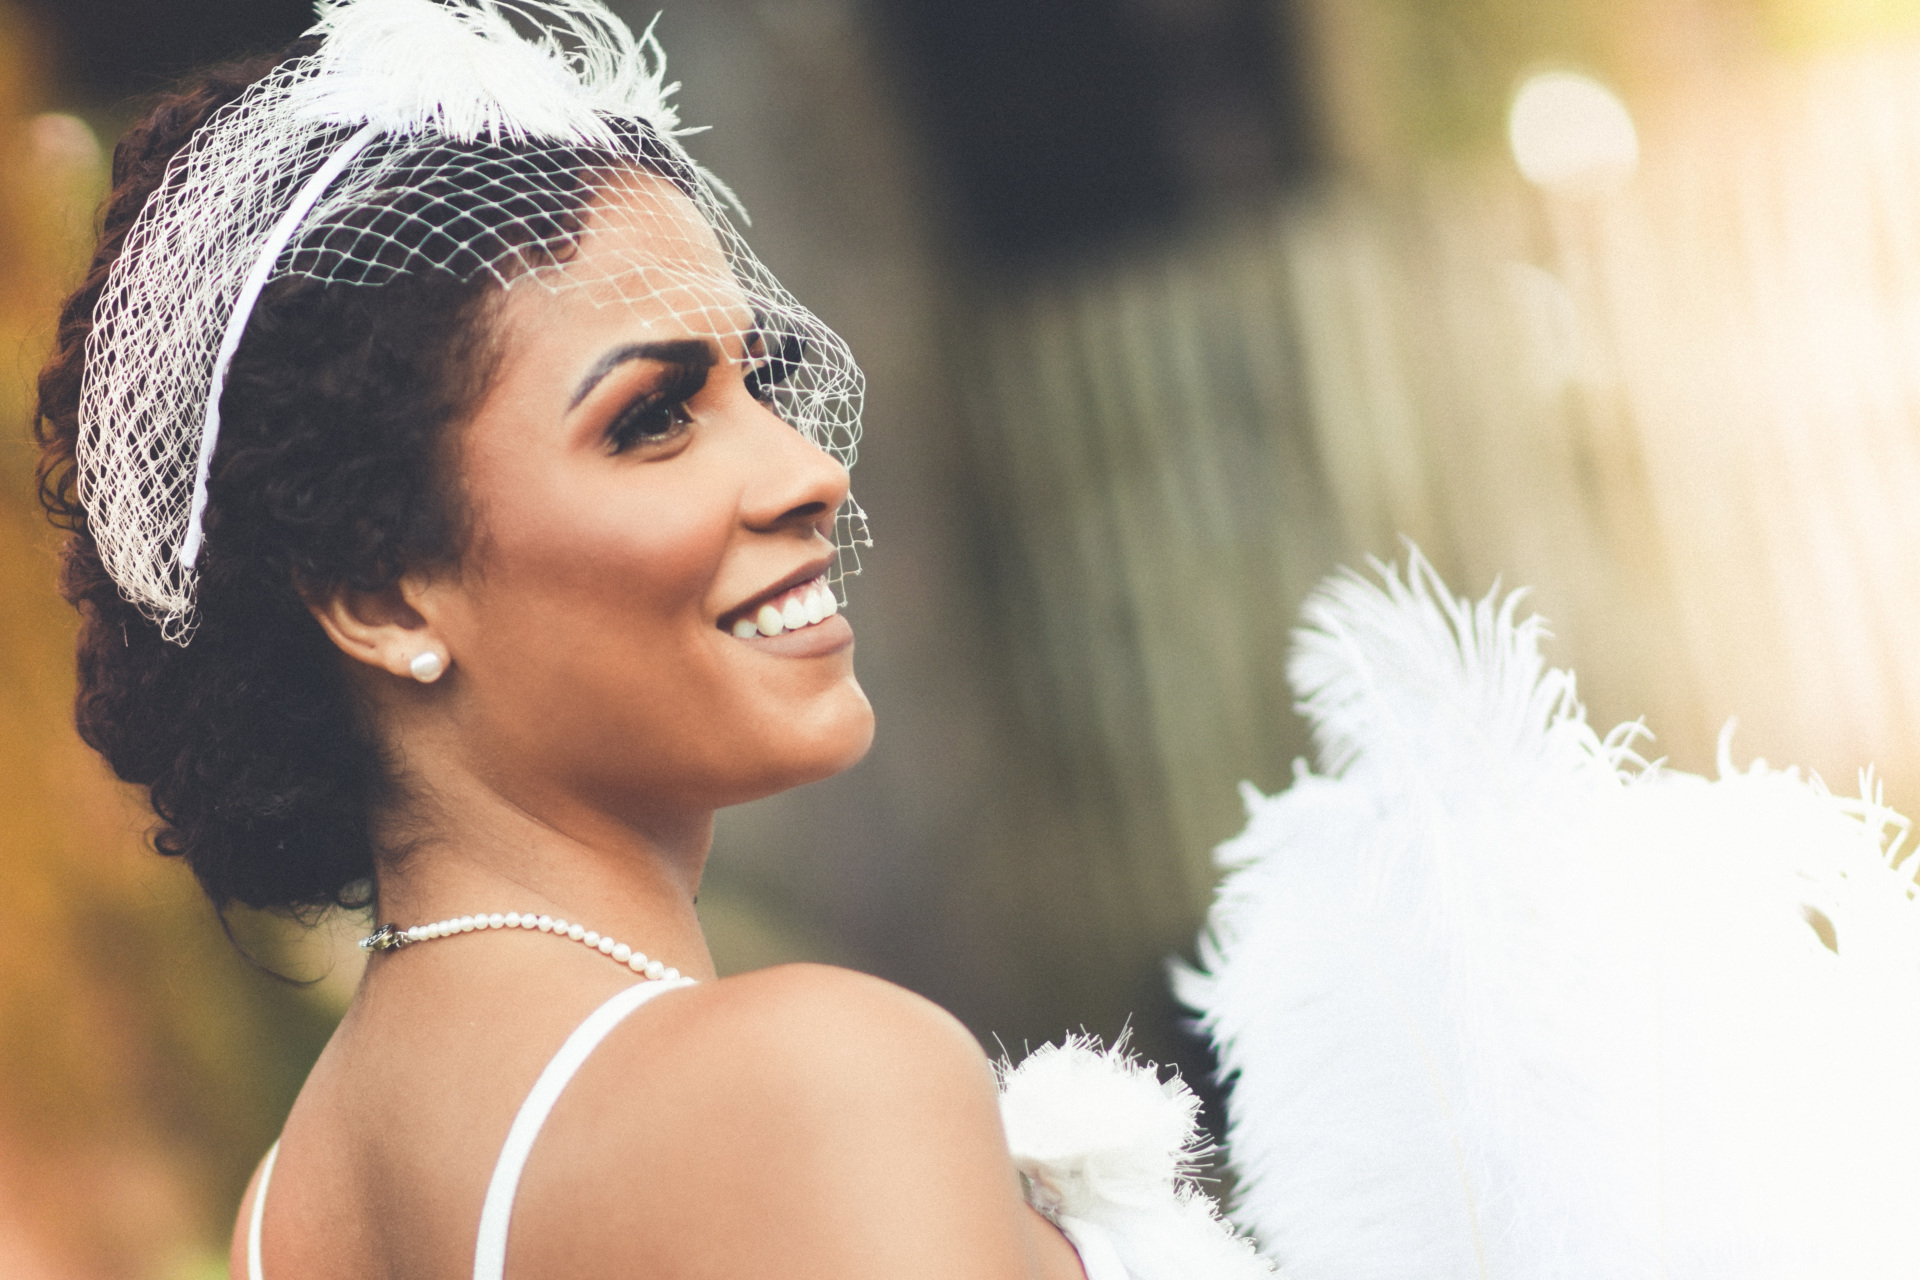 Woman in wedding dress and accessories smiling